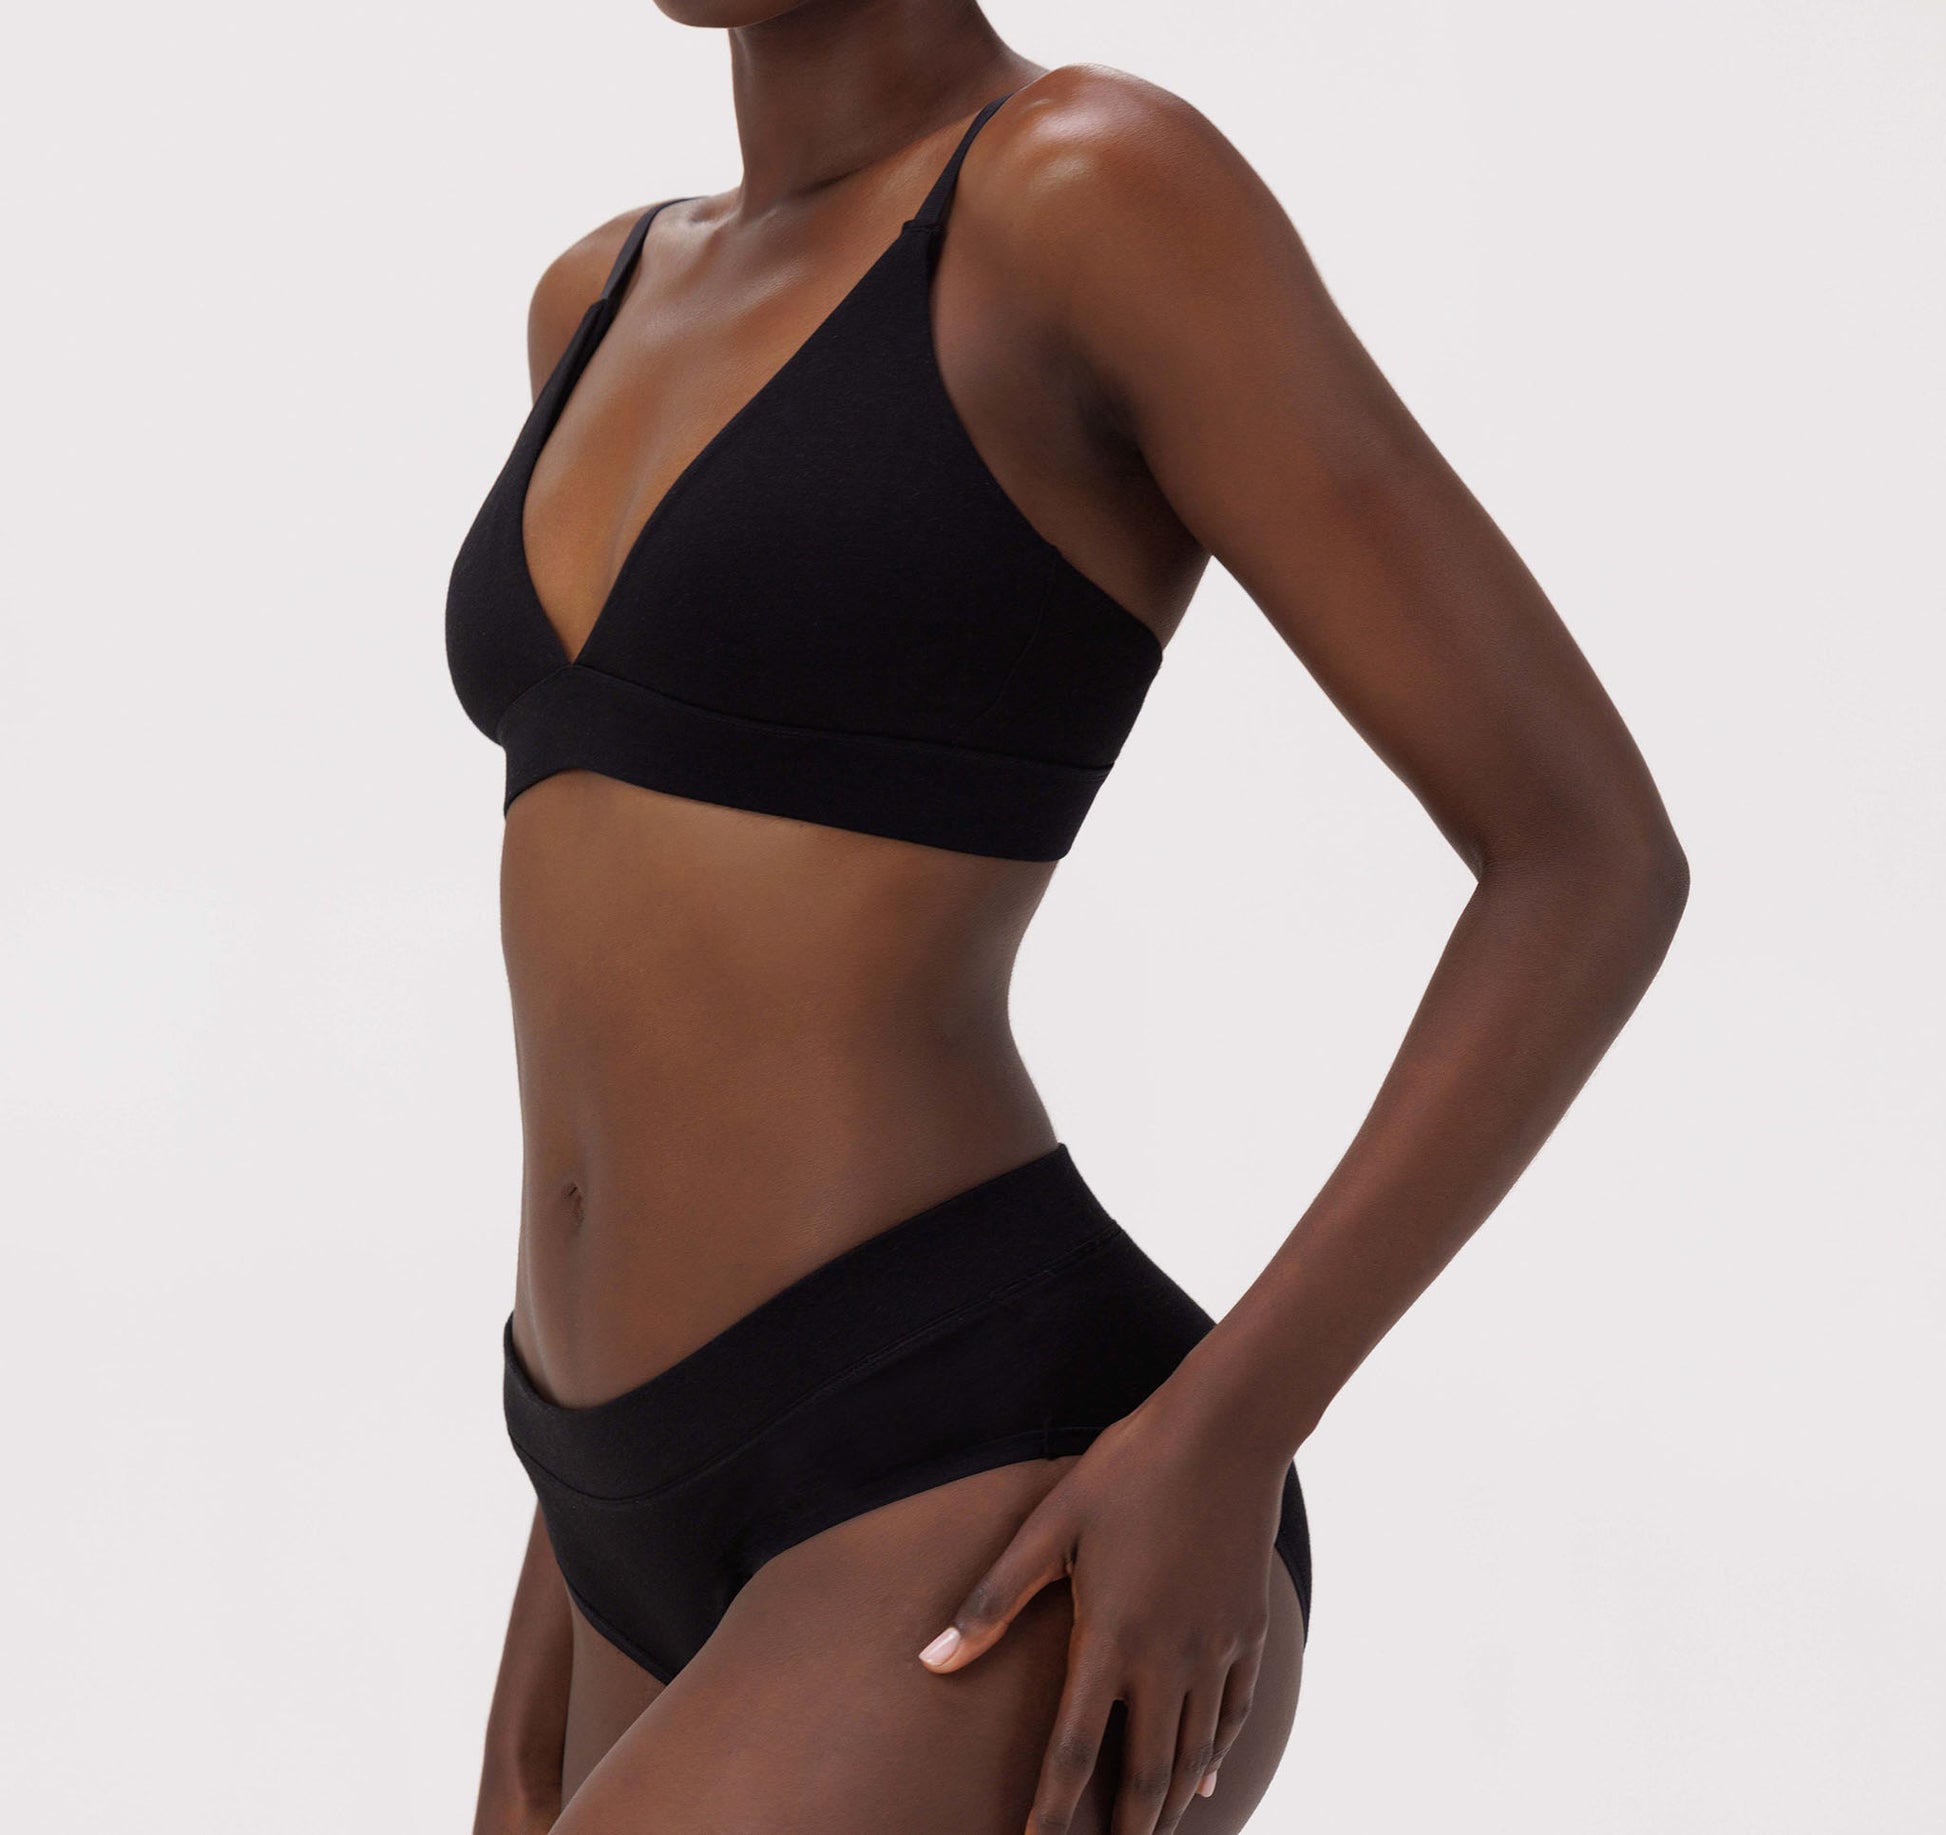 Bamboo Bras, Basics in Natural and Recycled Fibers